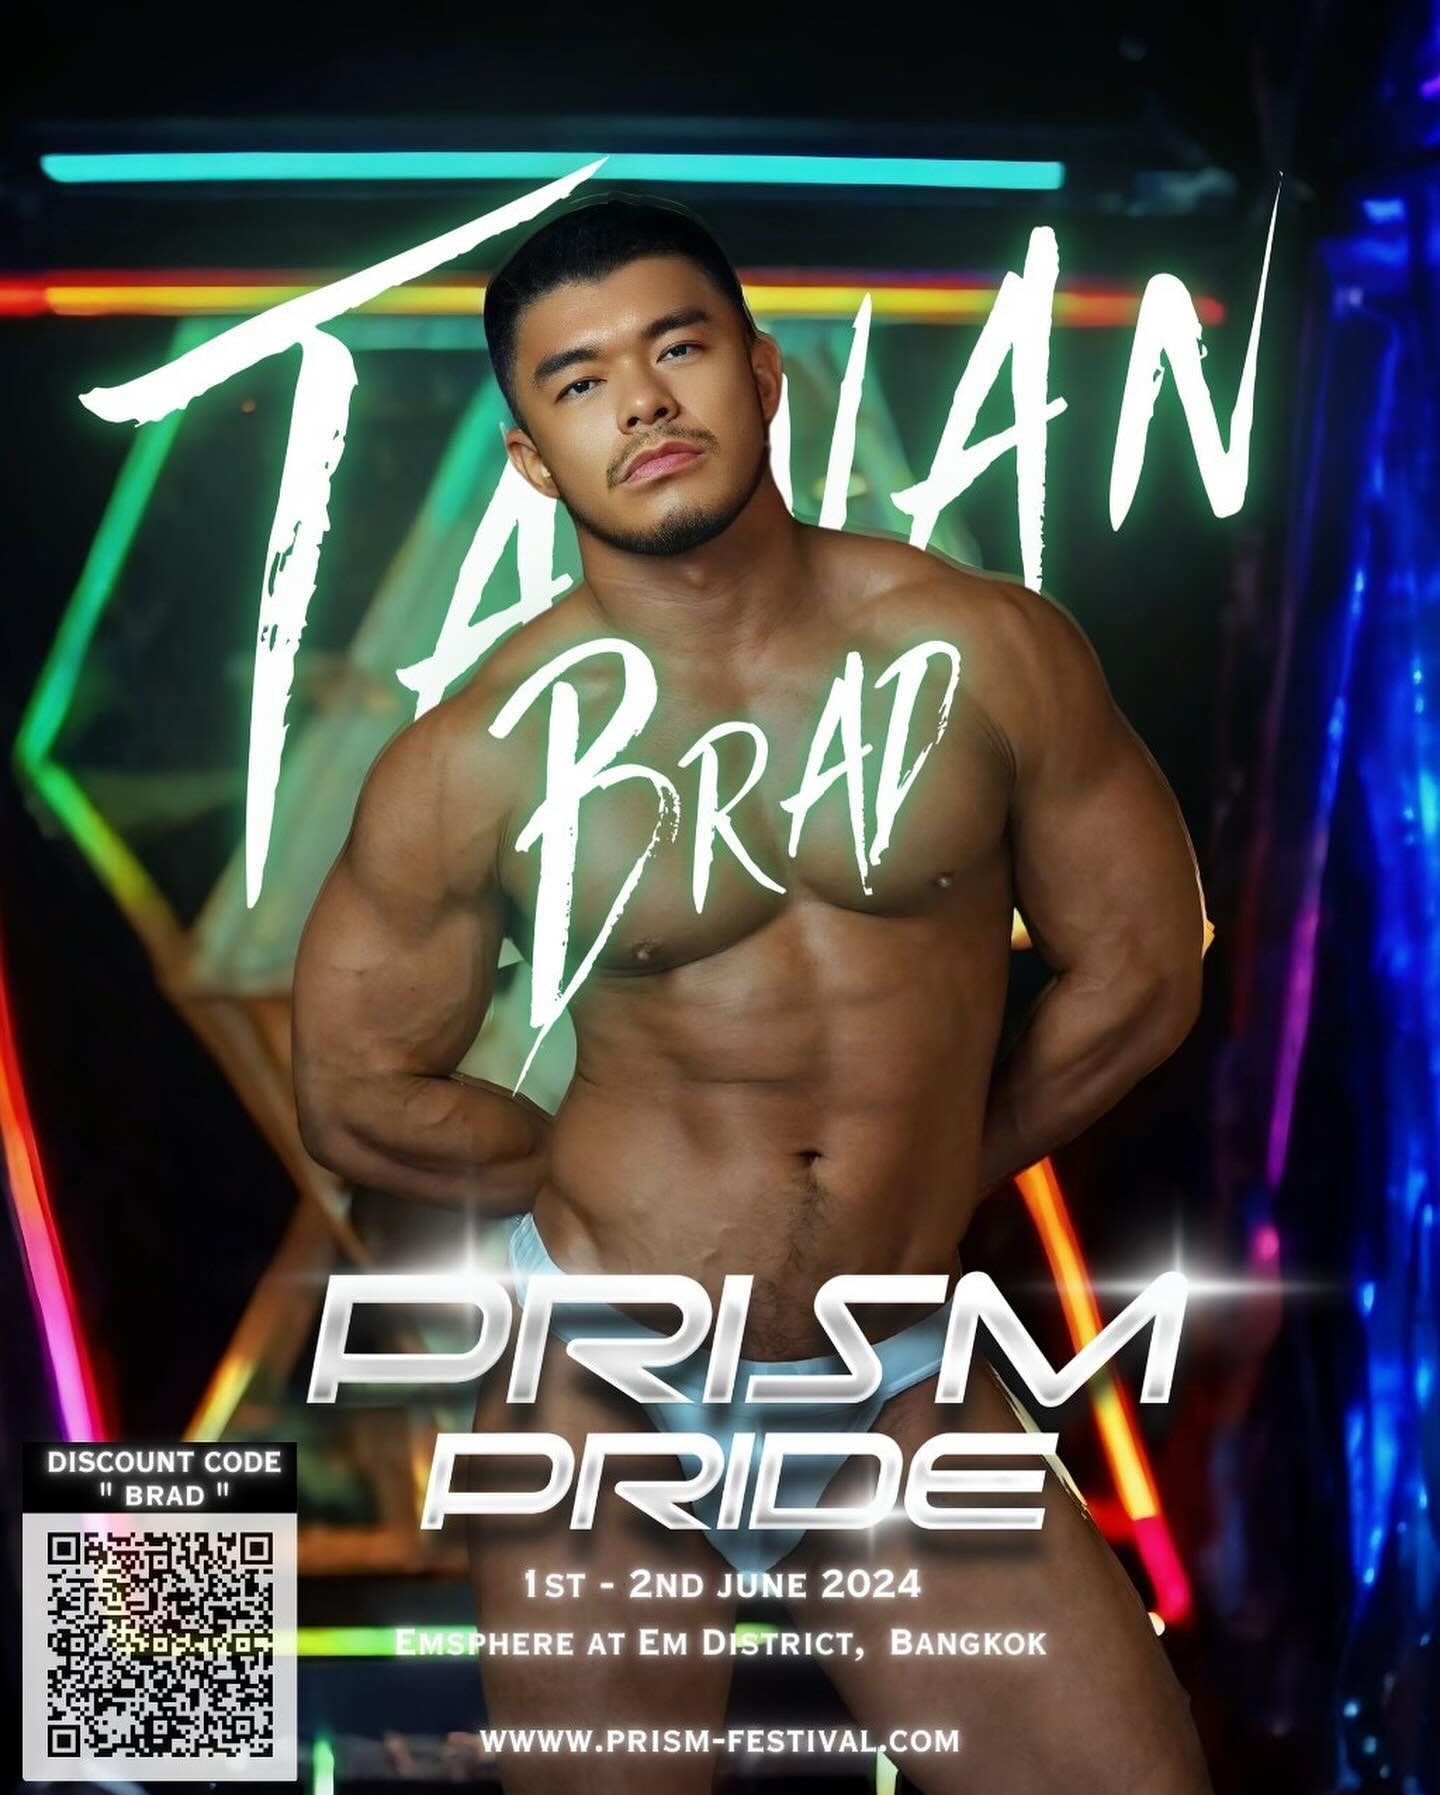 🇹🇭 PRISM PRIDE 2024 

Come join us for PRISM Festival this June 1st and 2nd. I’ll be seeing you guys again in BKK!! Let’s enjoy two hot nights together and get the pride month started!! 

Scan my QR code to get 10% discount on your tickets!
สามารถรับส่วนลด 10% ด้วย QR code ของฉันค่ะ!
私のQRコードを利用すれば10%割引されます！
掃瞄QR code購票立即享票價9折優惠！
제 포스터에 있는 QR코드로 티켓을 구매하시면 10% 할인을 받으 실 수 있습니다！

6/1-6/2 我們曼谷Gay Pride見！（跟今年潑水GC同一個場地）

Can’t wait to see you guys!! 🩶🙌🏾